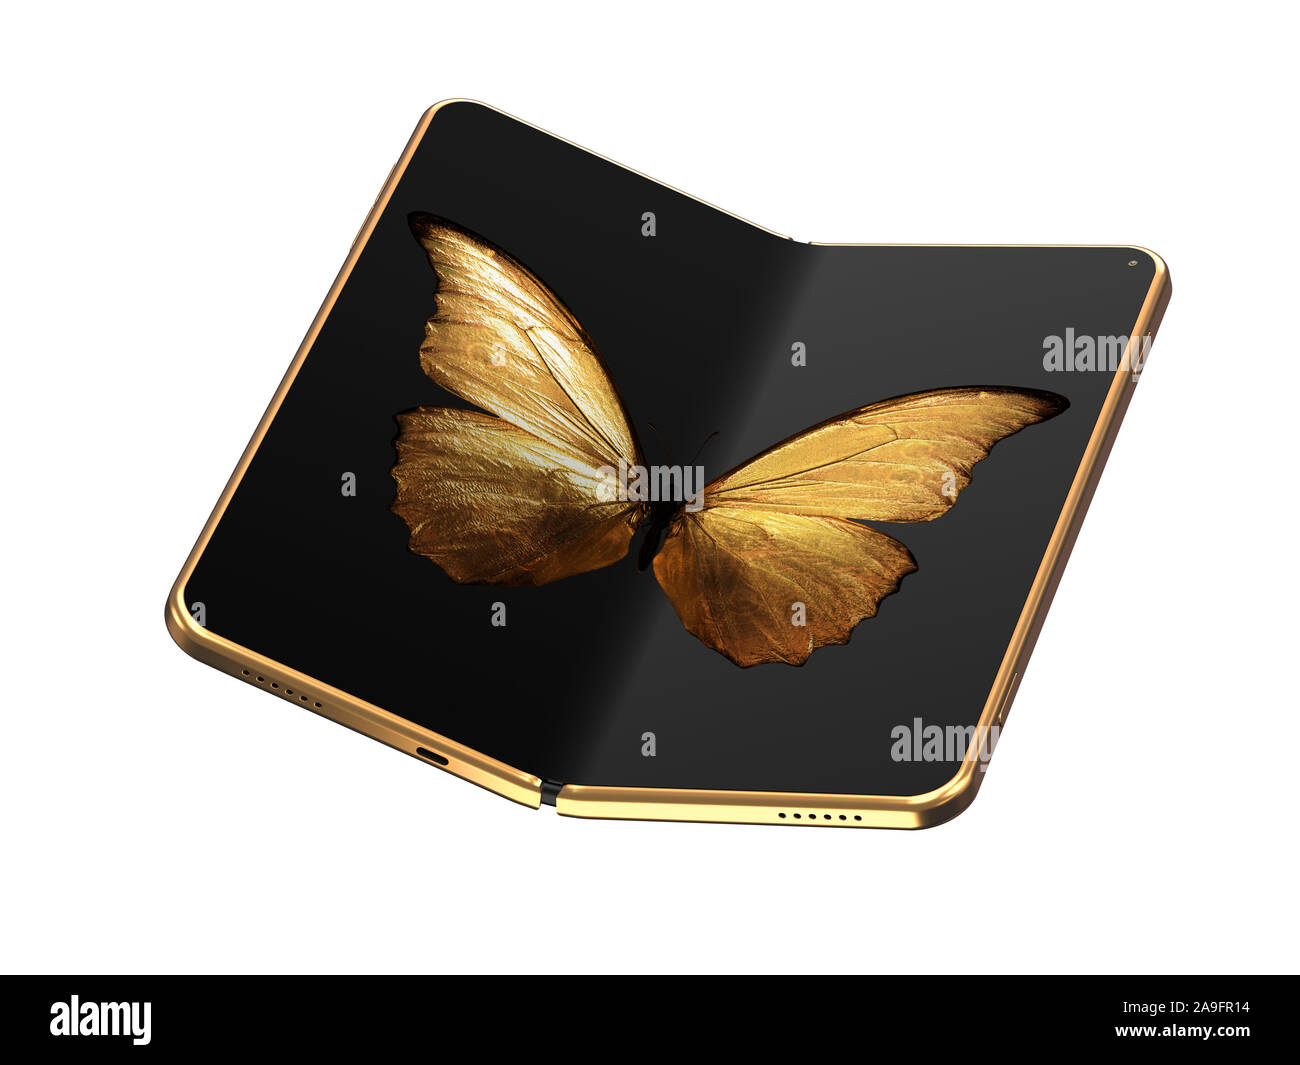 Concept of foldable smartphone folding on the longer side with golden butterfly image on screen. Flexible smartphone isolated on white background. 3D Stock Photo